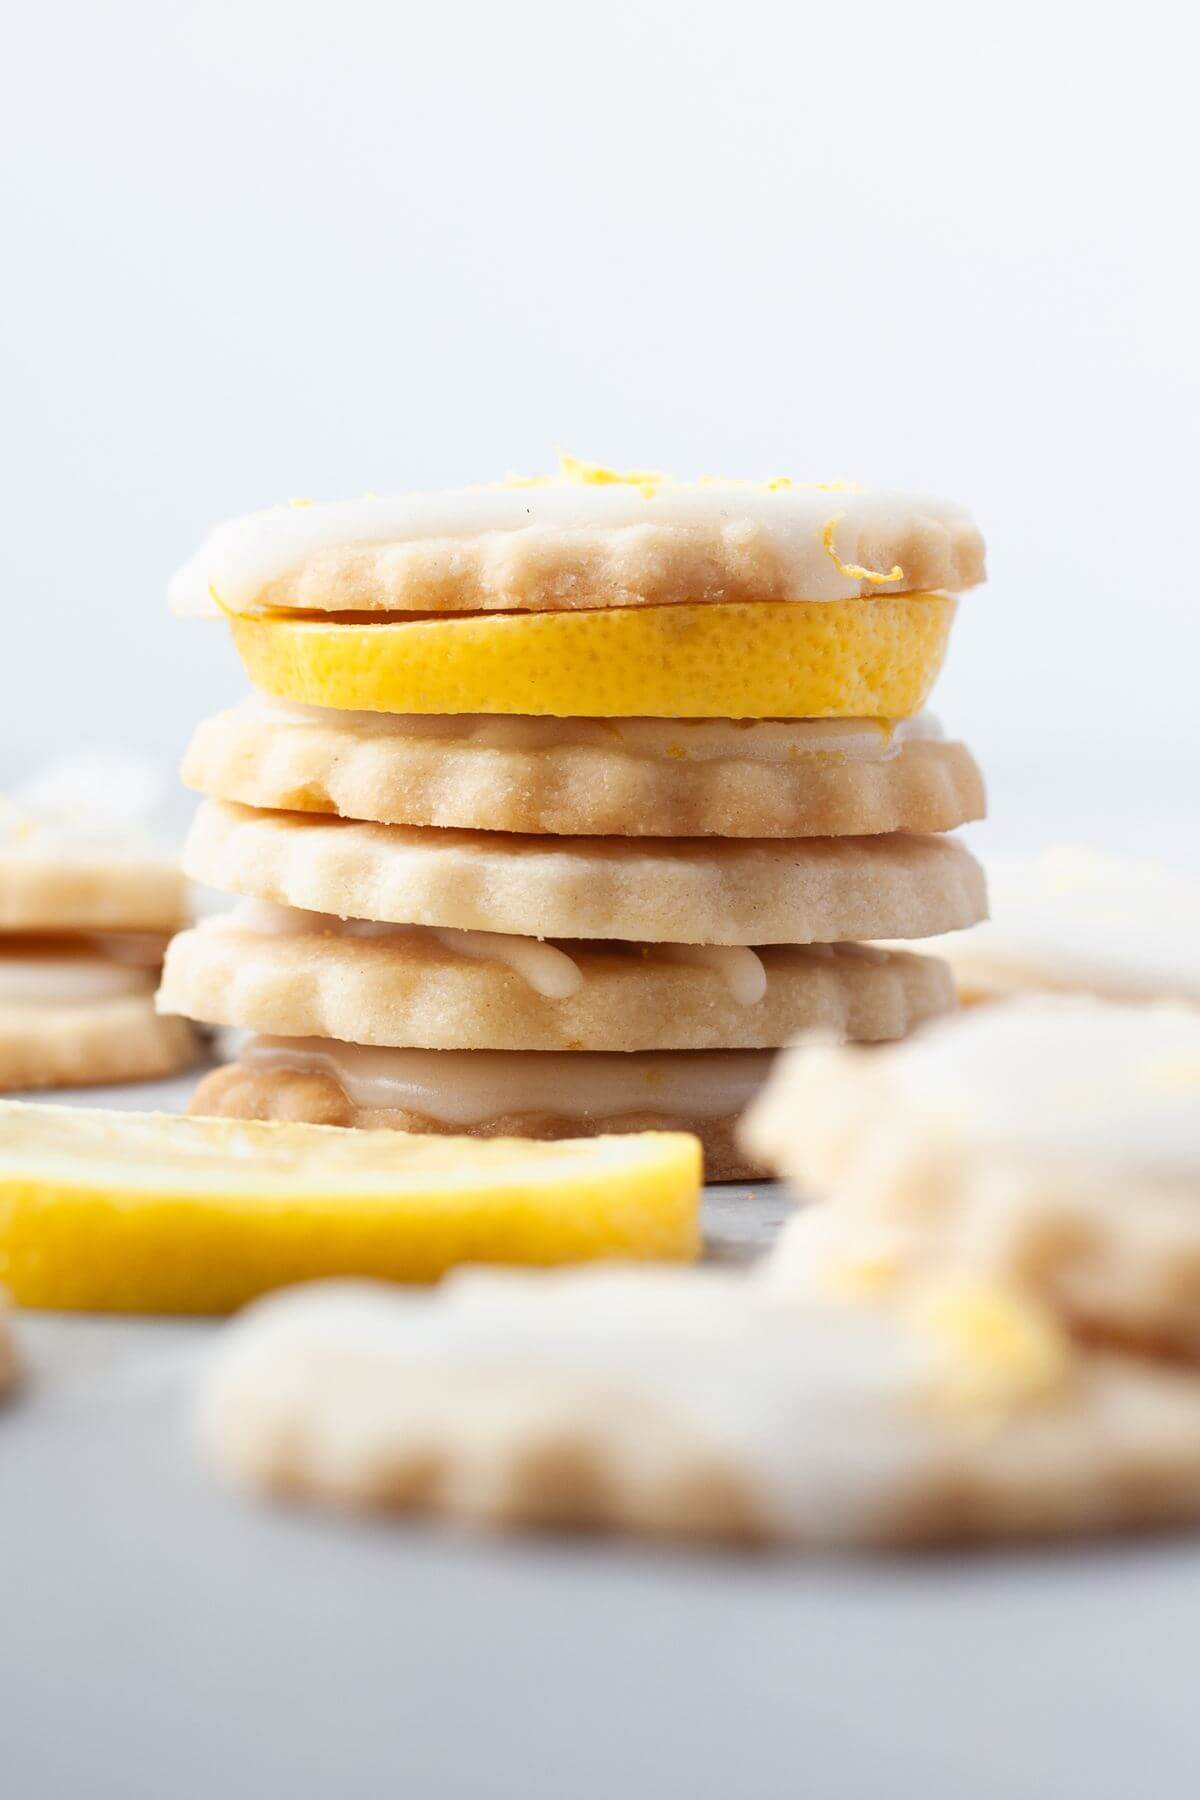 A stack of cookies has lemon slices between them.